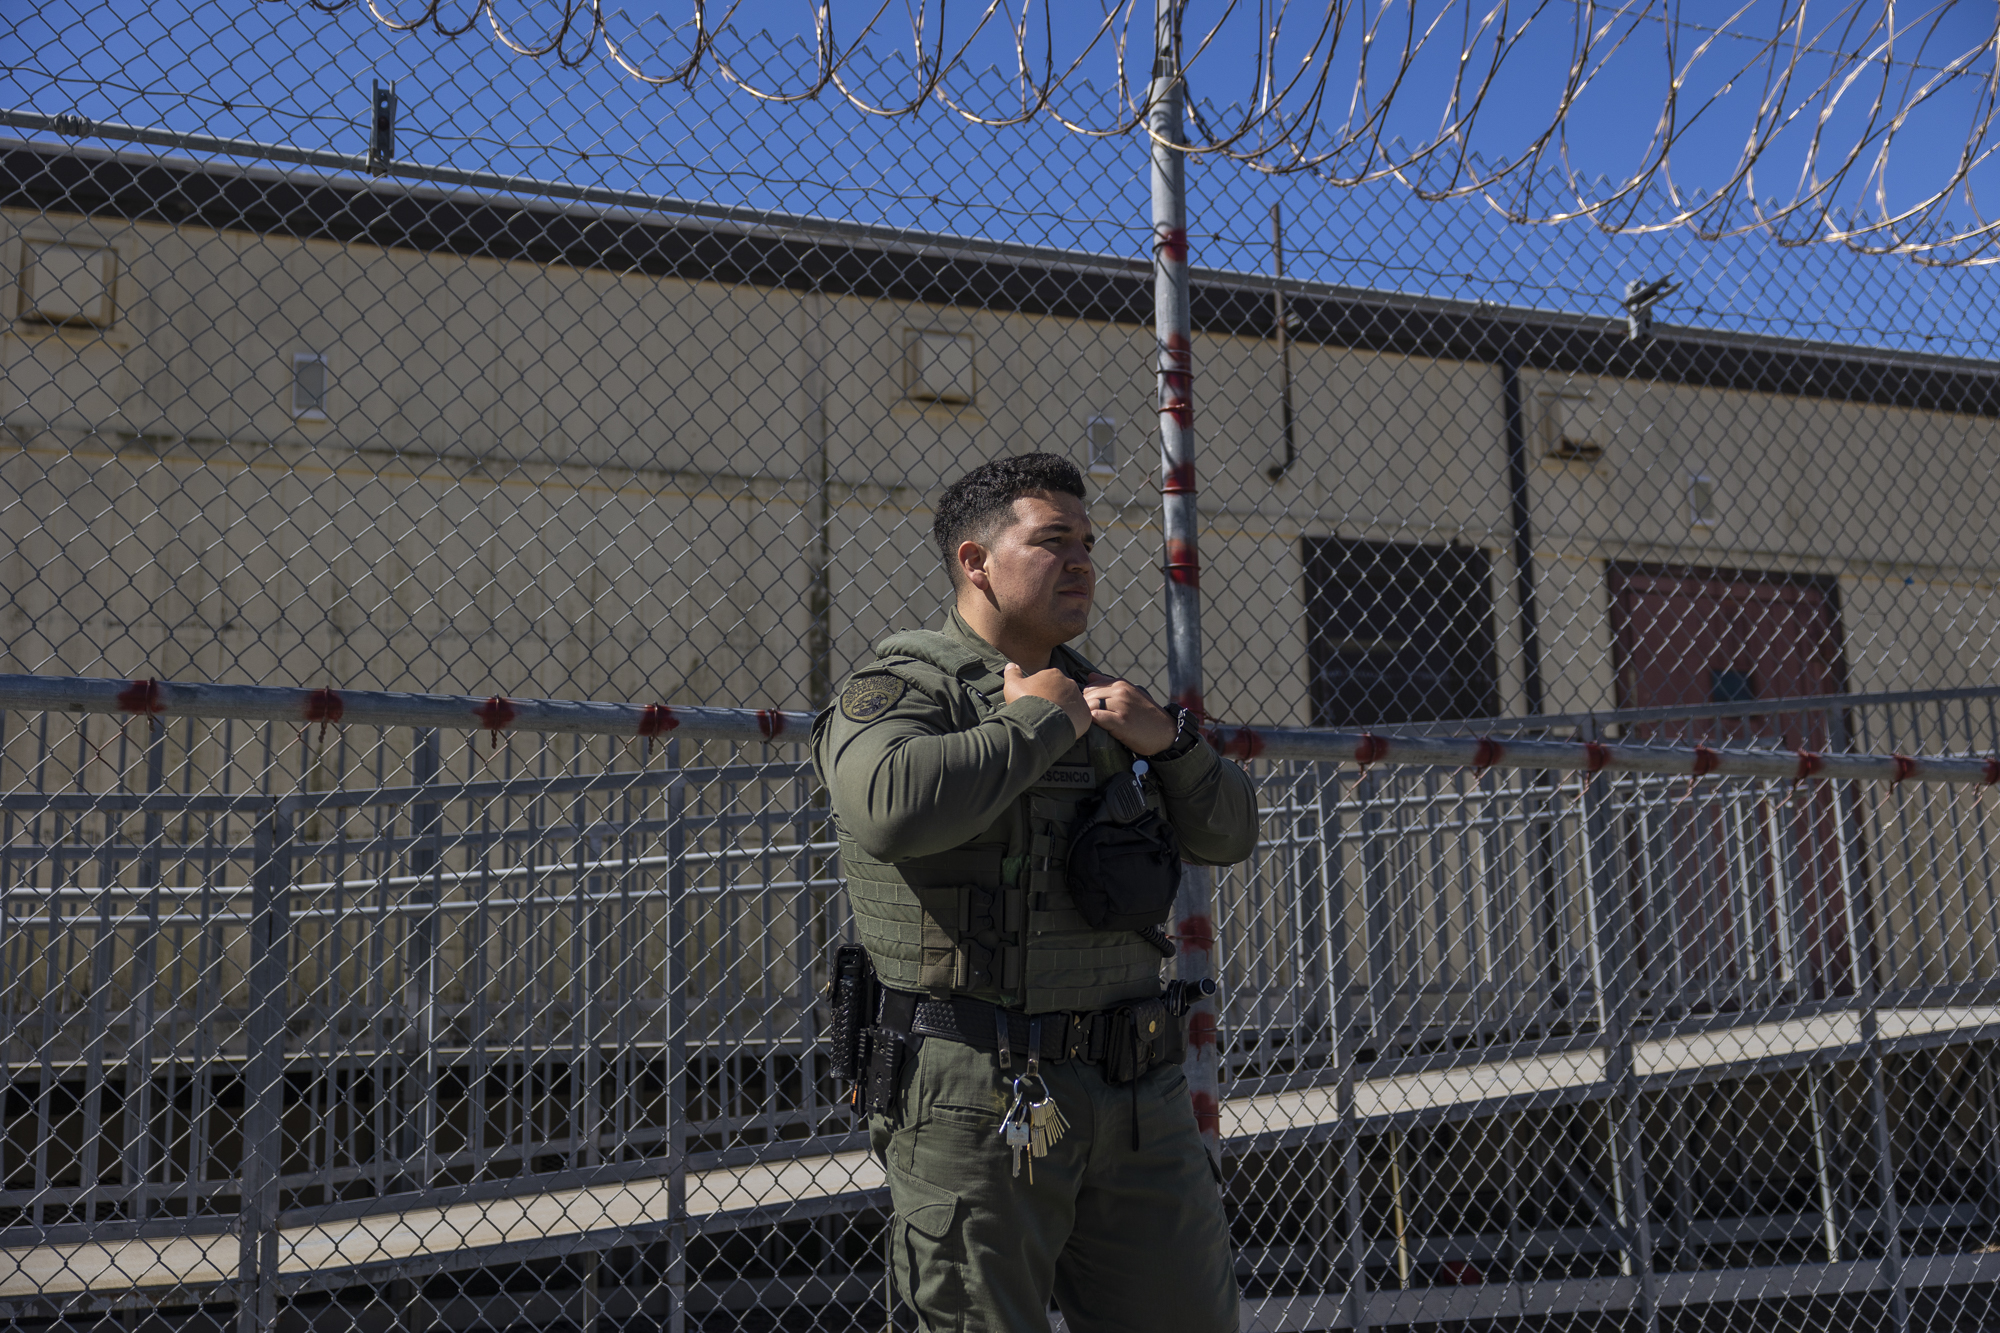 A person in a green uniform stands in front of a chain link fence topped in barbed wire.